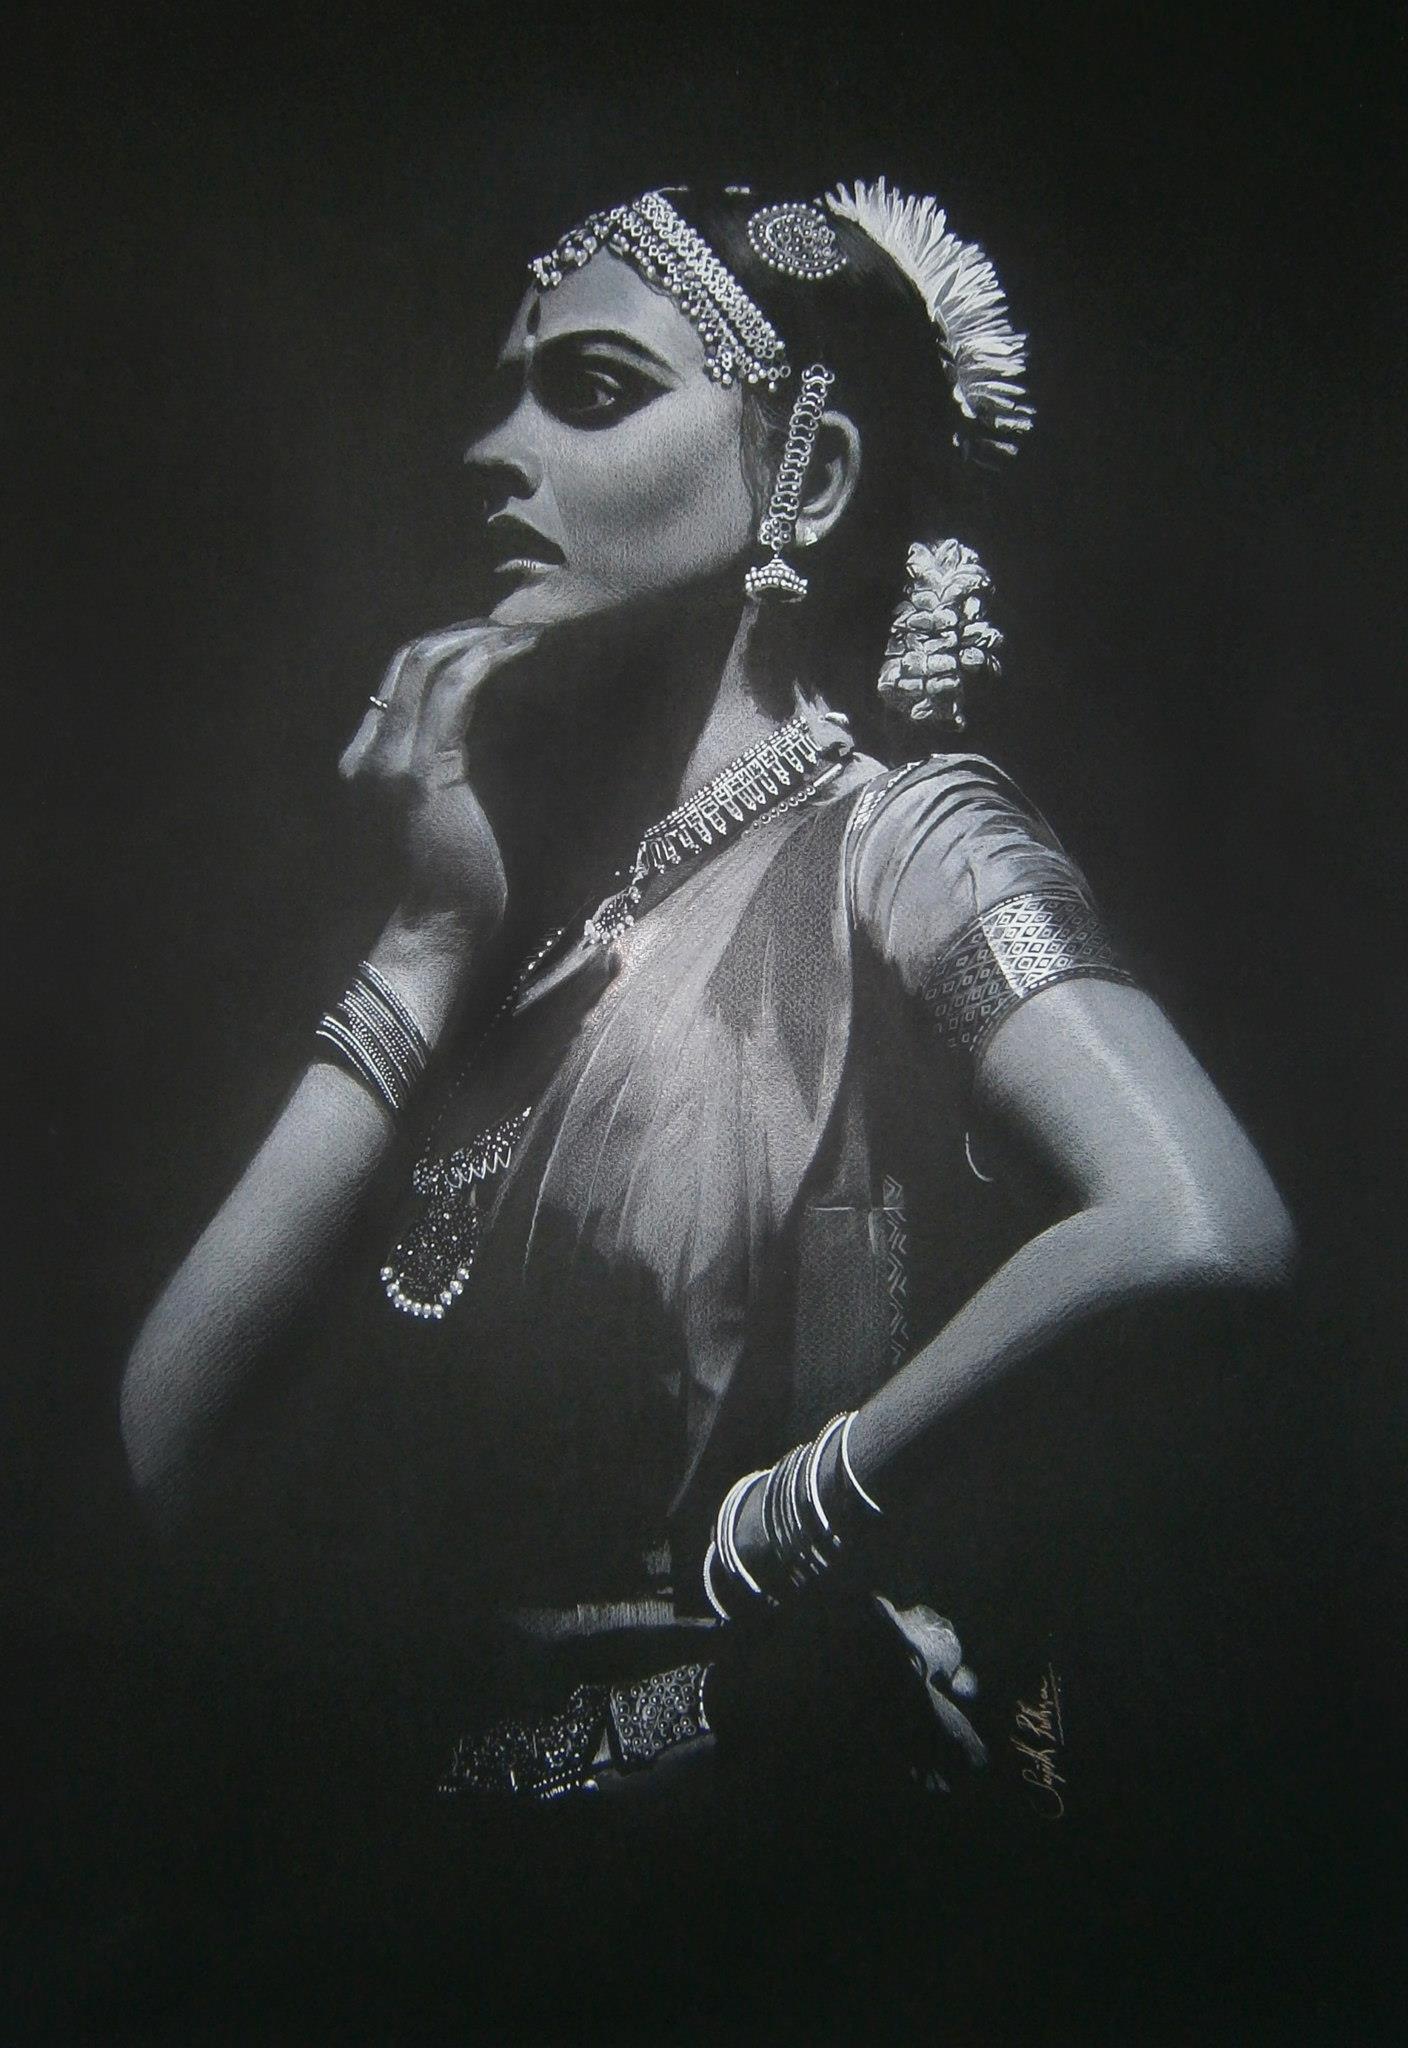 Aggregate more than 158 pencil sketches of bharatanatyam latest